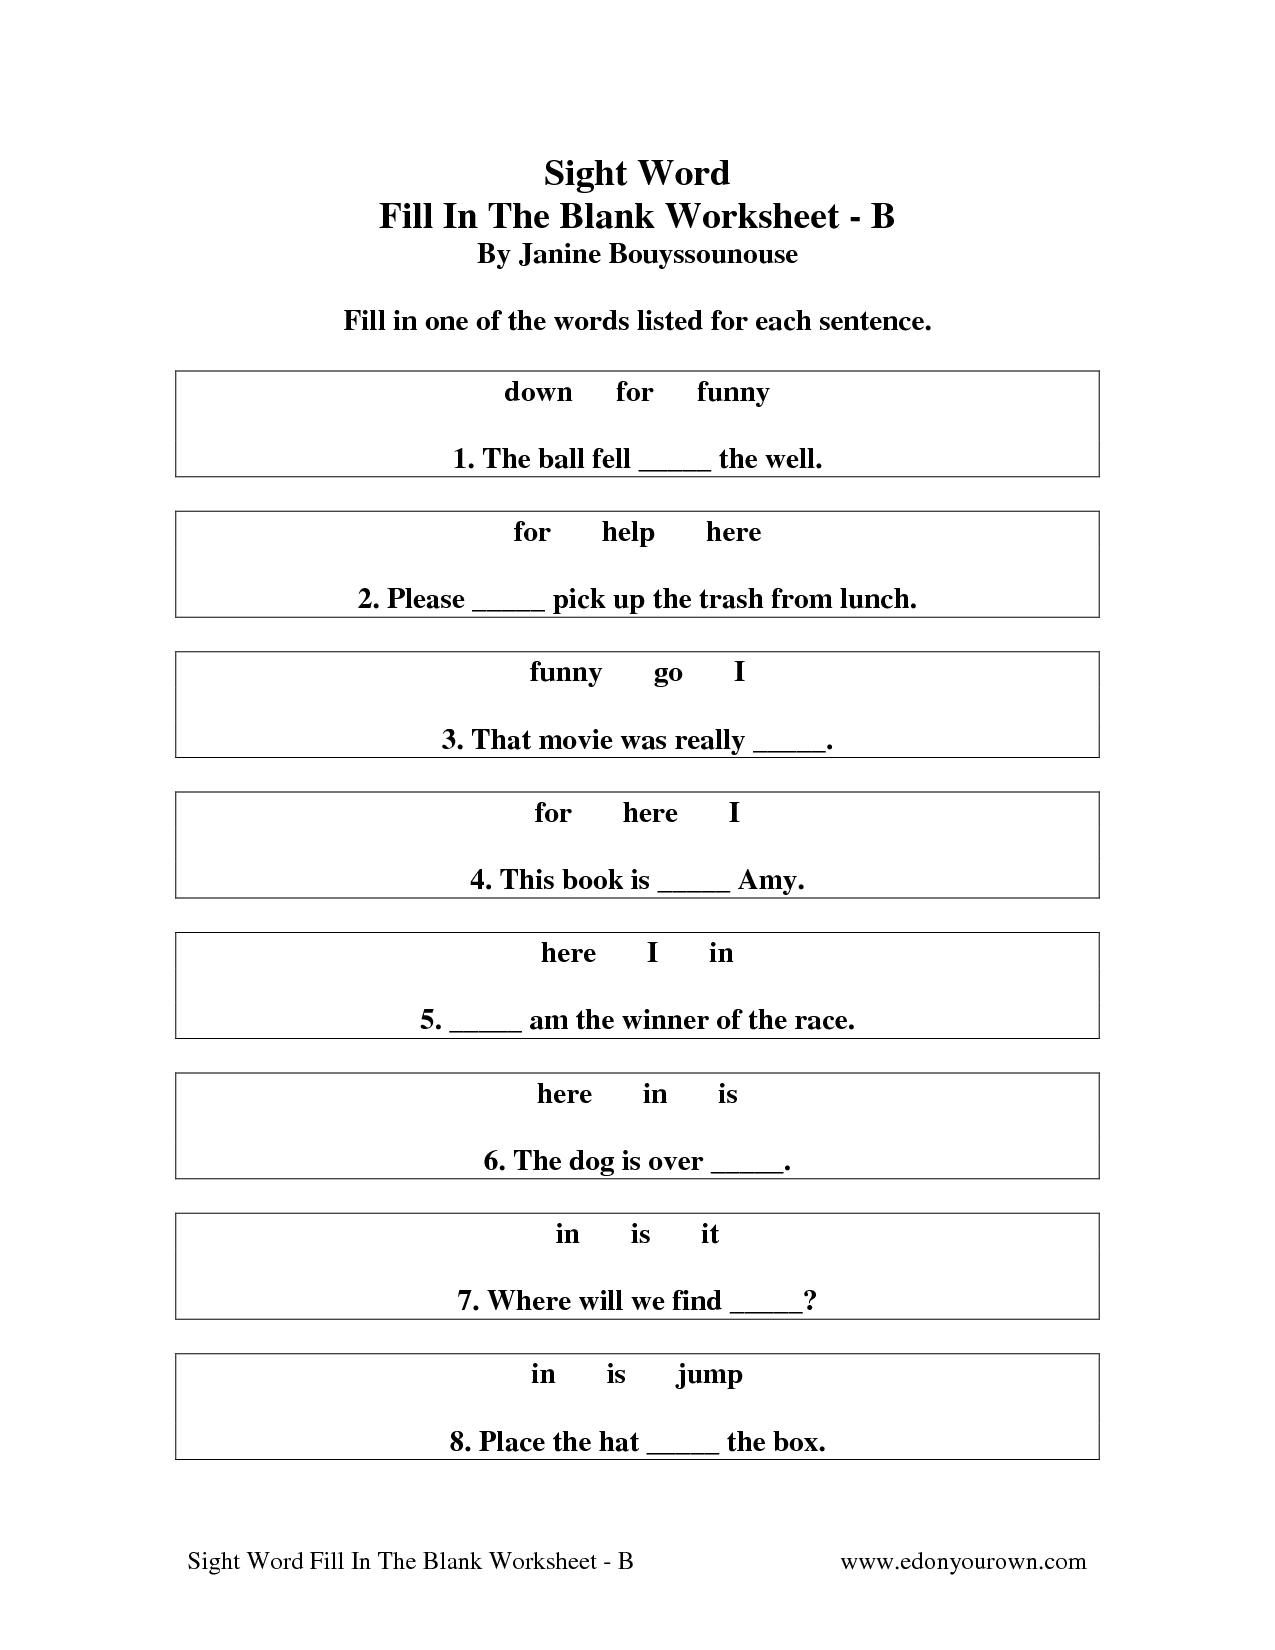 16-best-images-of-fill-in-blank-worksheets-fill-in-the-blank